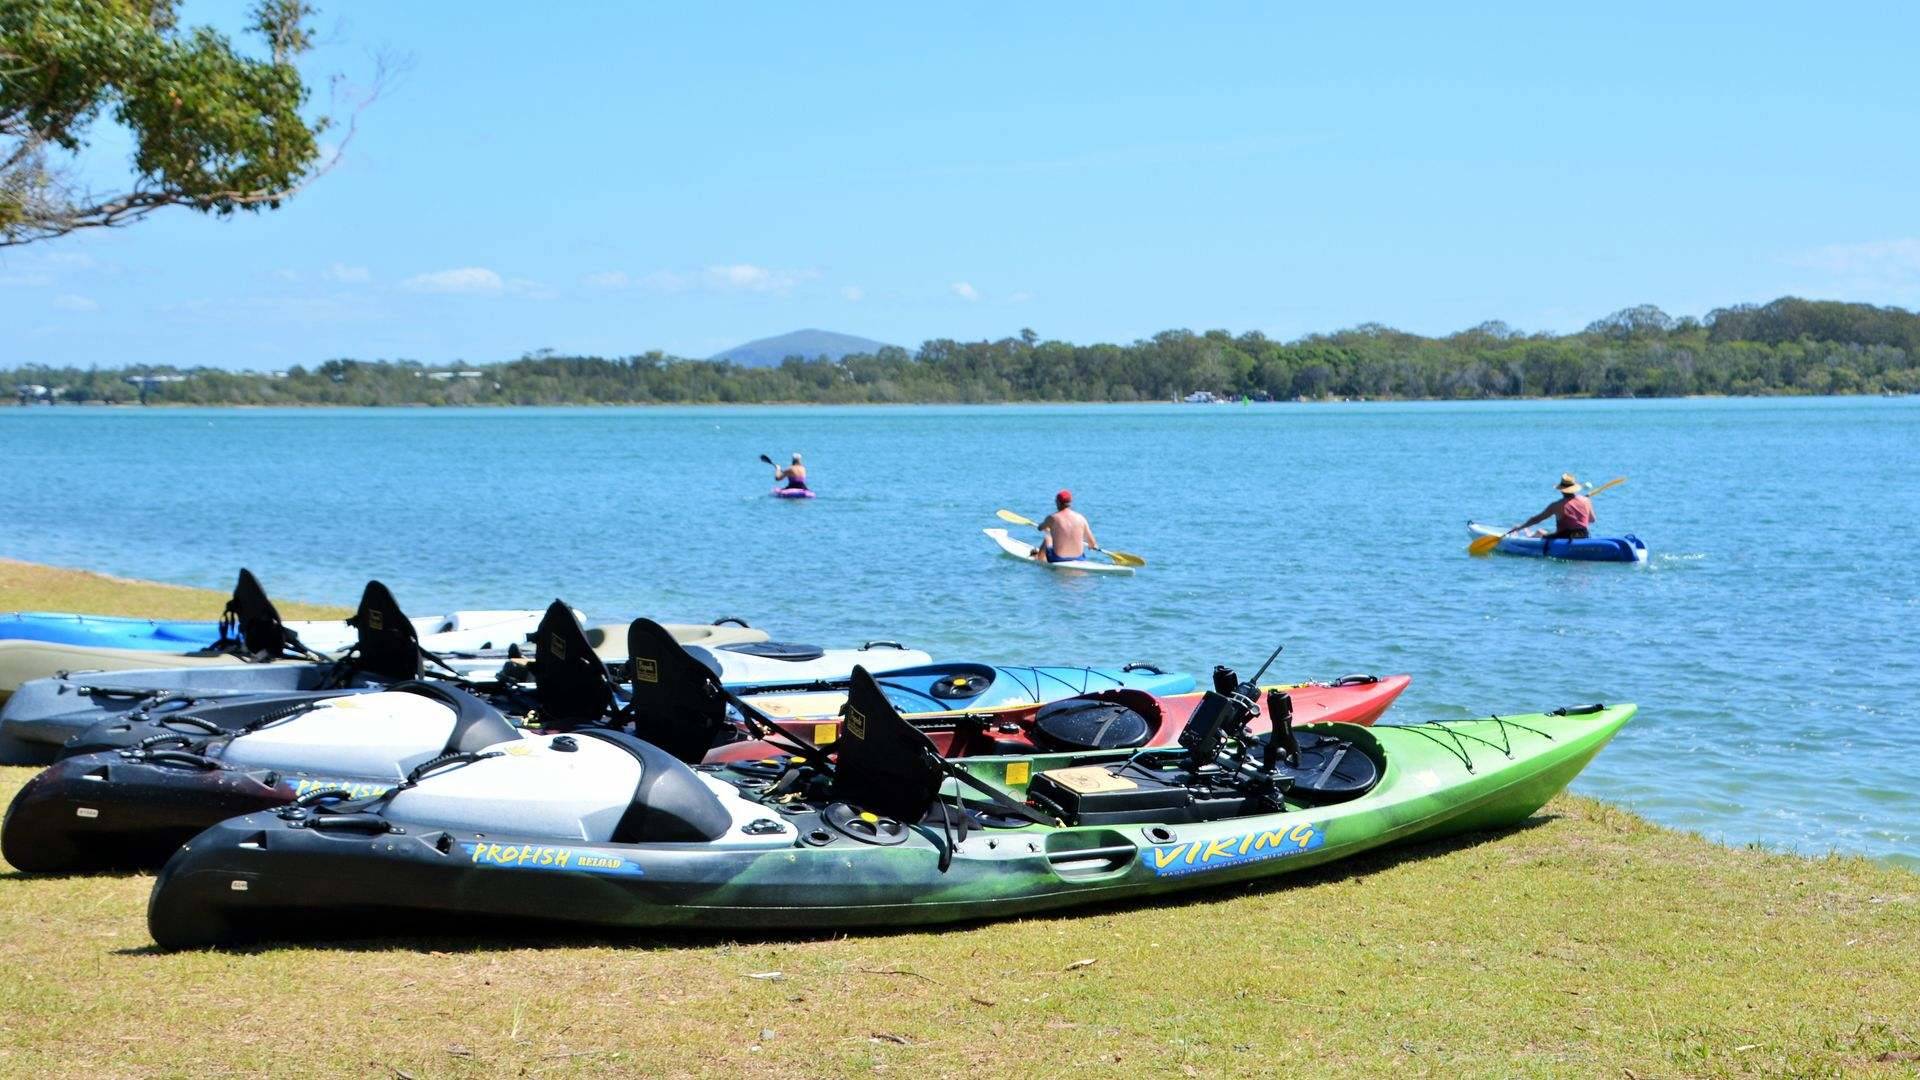 Kayak and SUPs for hire - discover the beautiful Central Coast